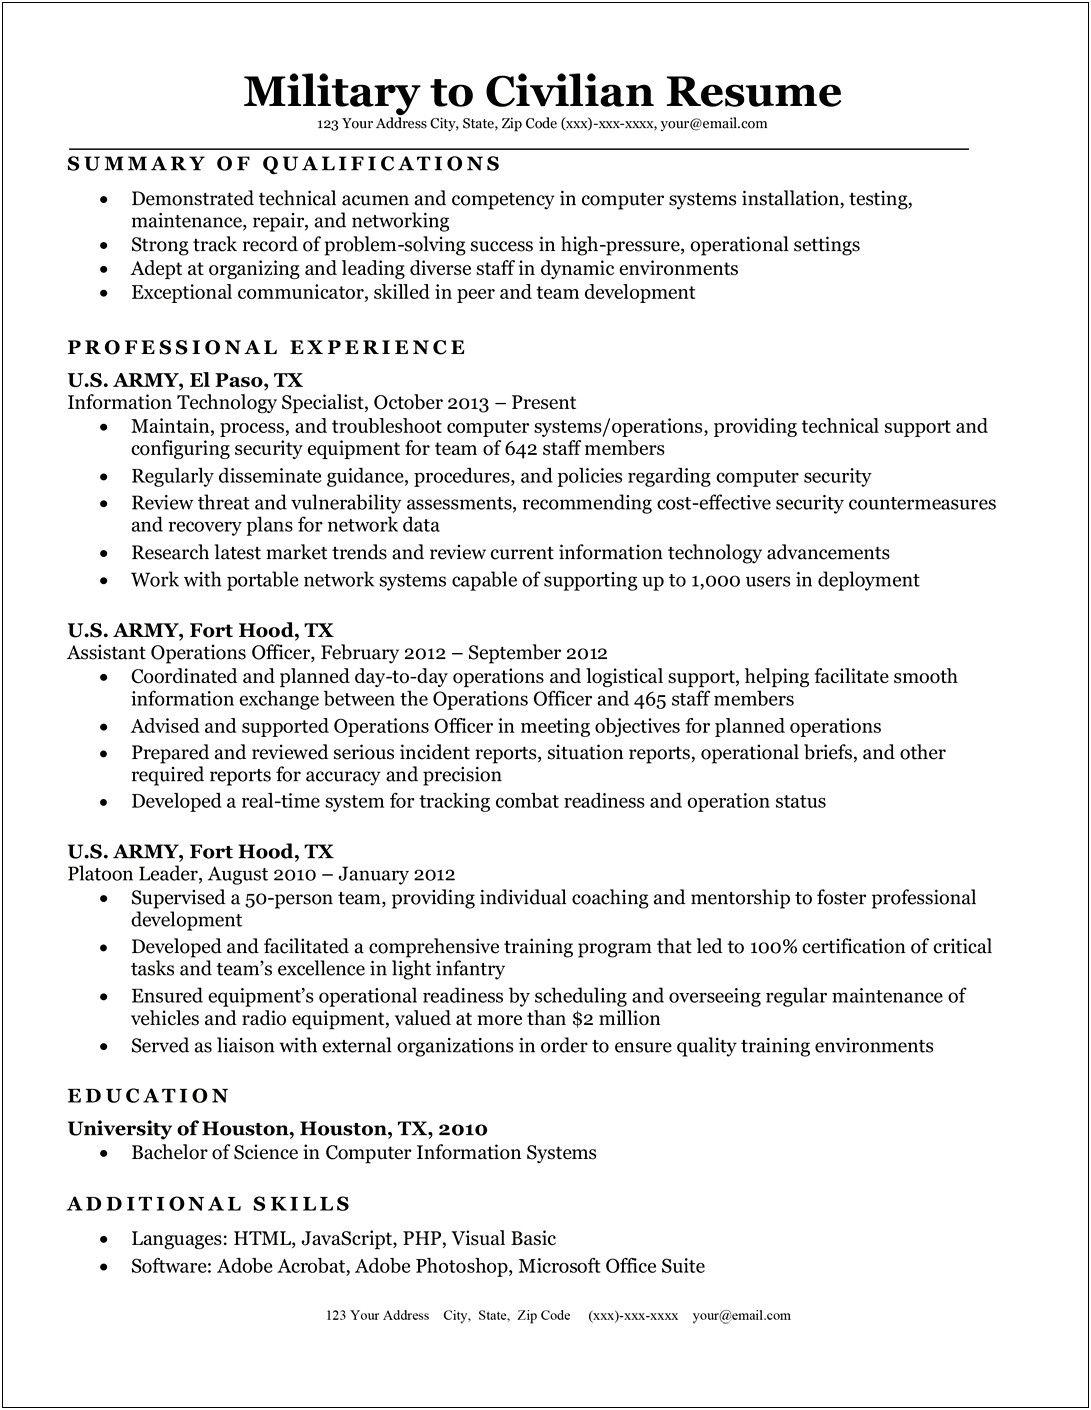 Sample Resume For Army Officer